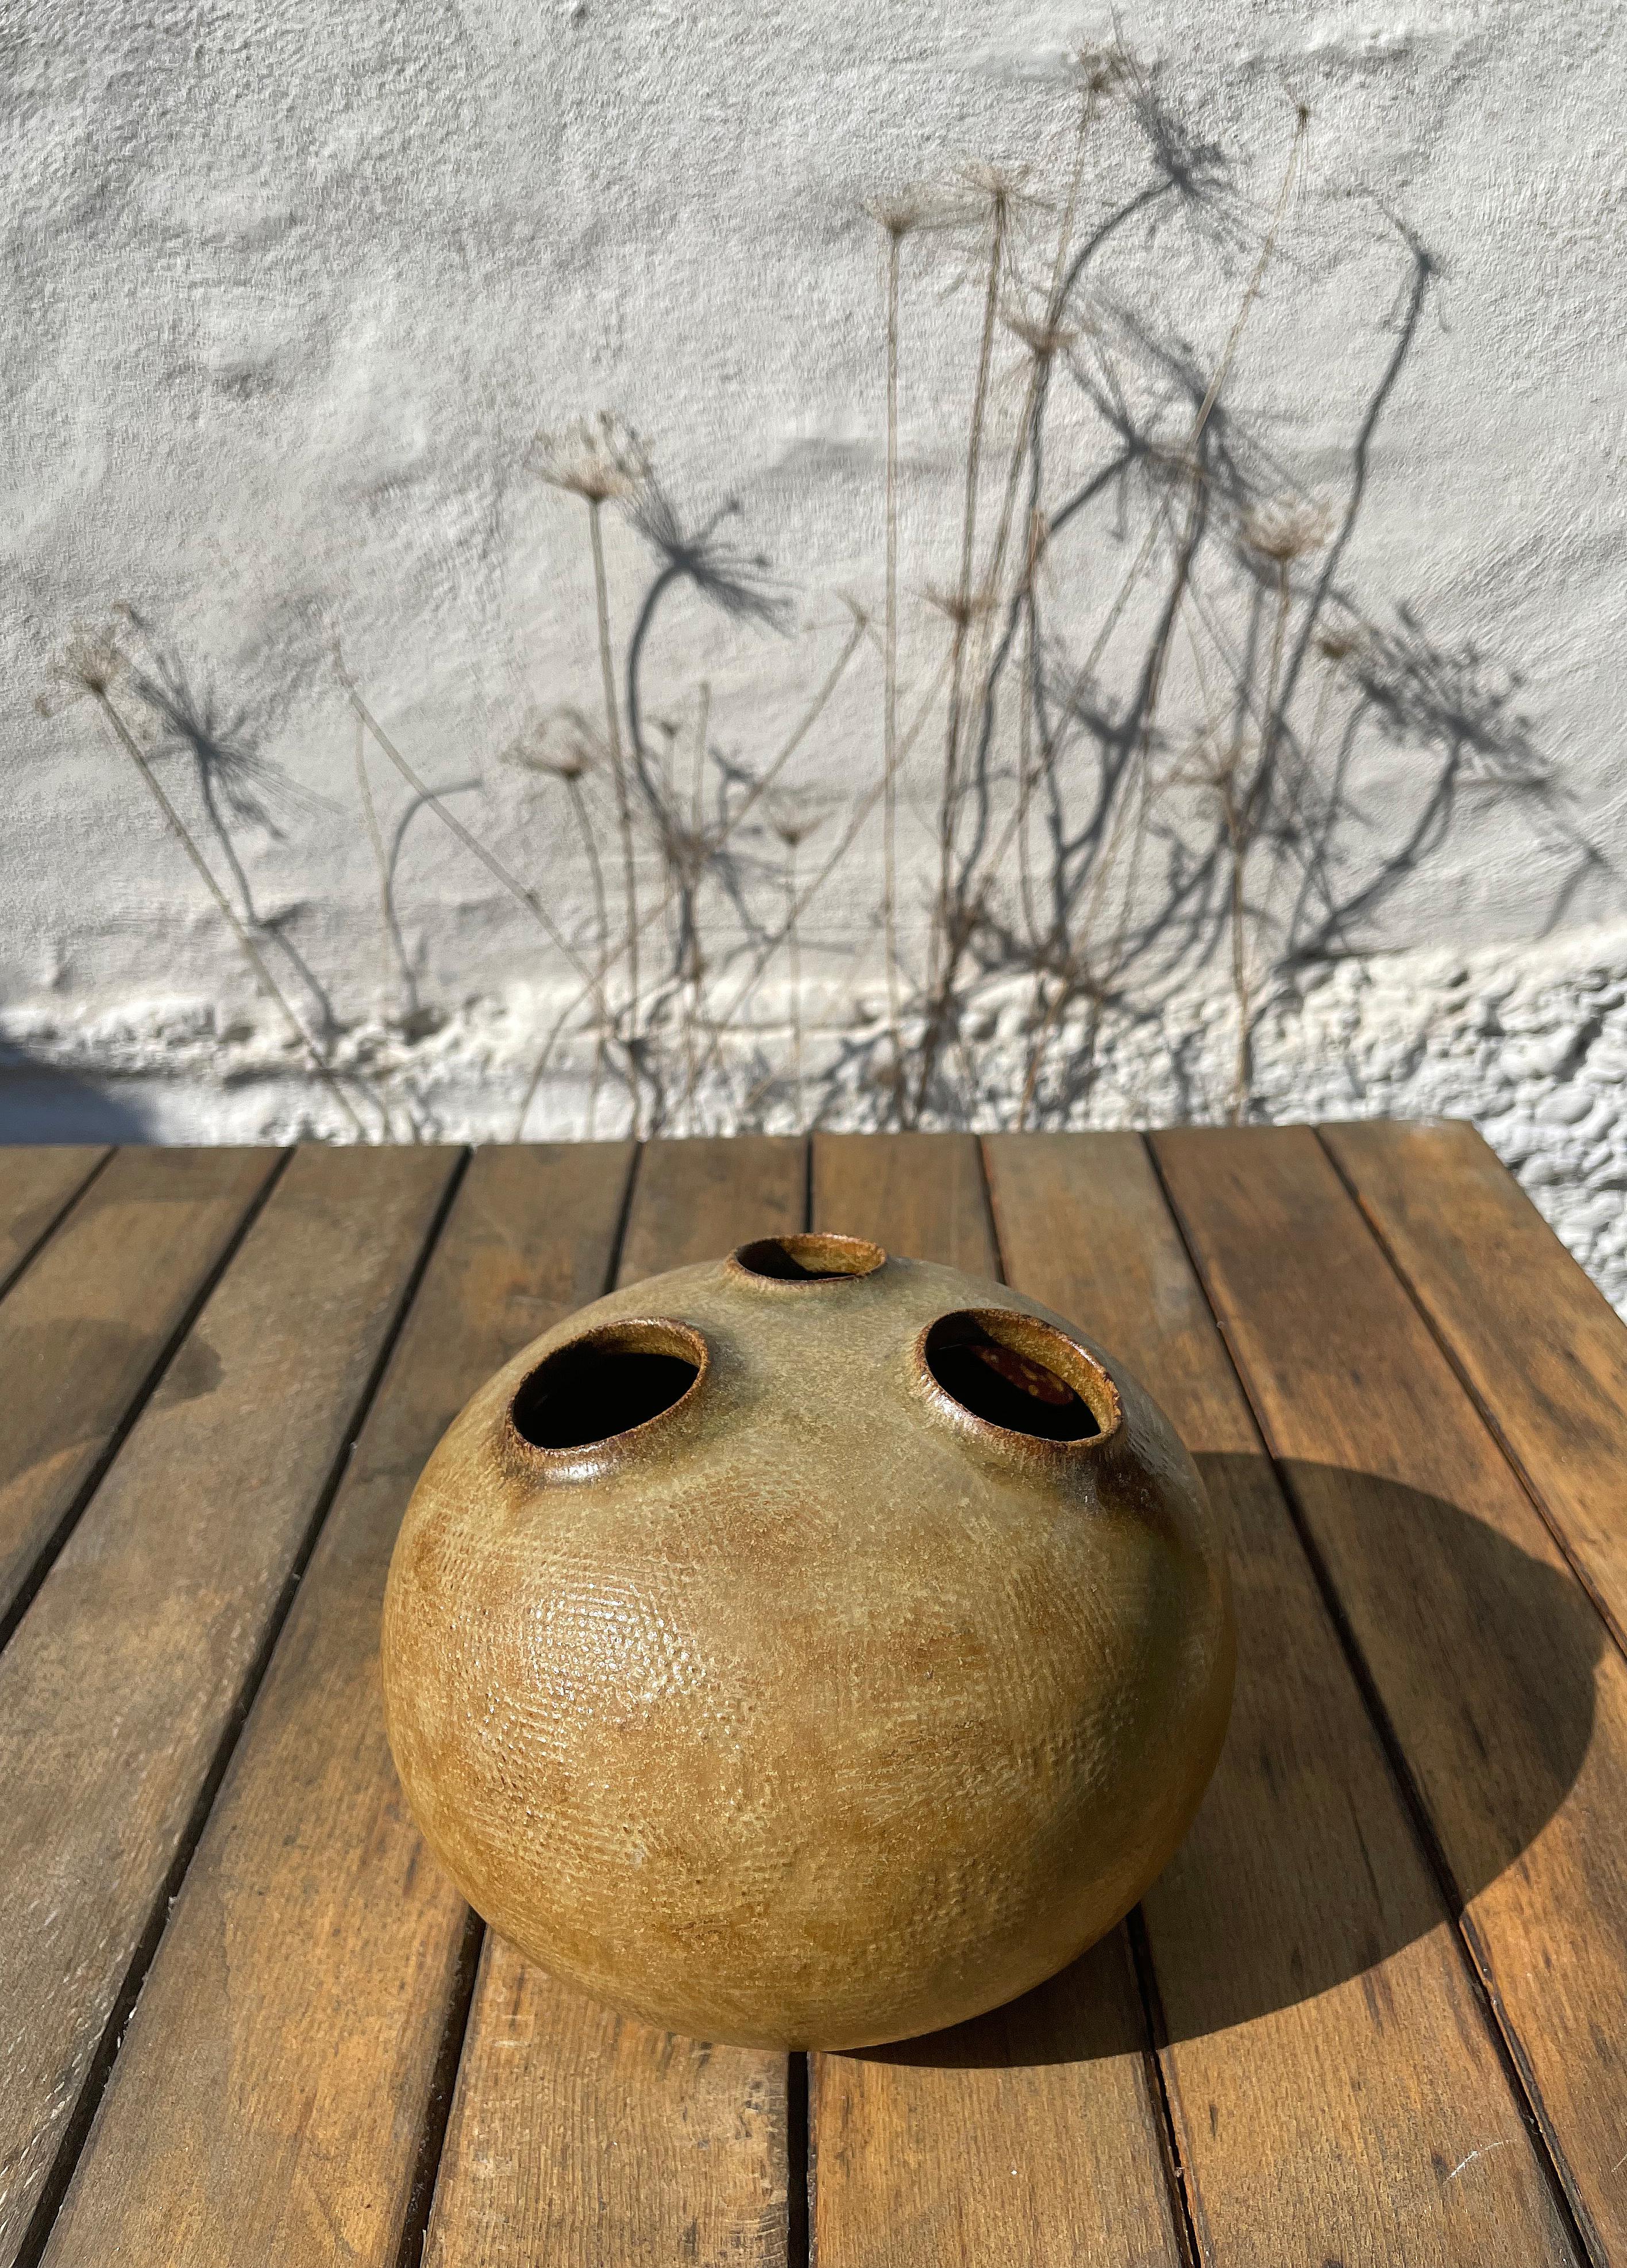 Glazed organic Mid-Century Modern tactile ceramic sculpture vase by Danish ceramic artist Kirsten Günther for Knabstrup in the early 1970s. Peanut brown earth colored glaze over handmade graphic relief imprints with three circular openings for